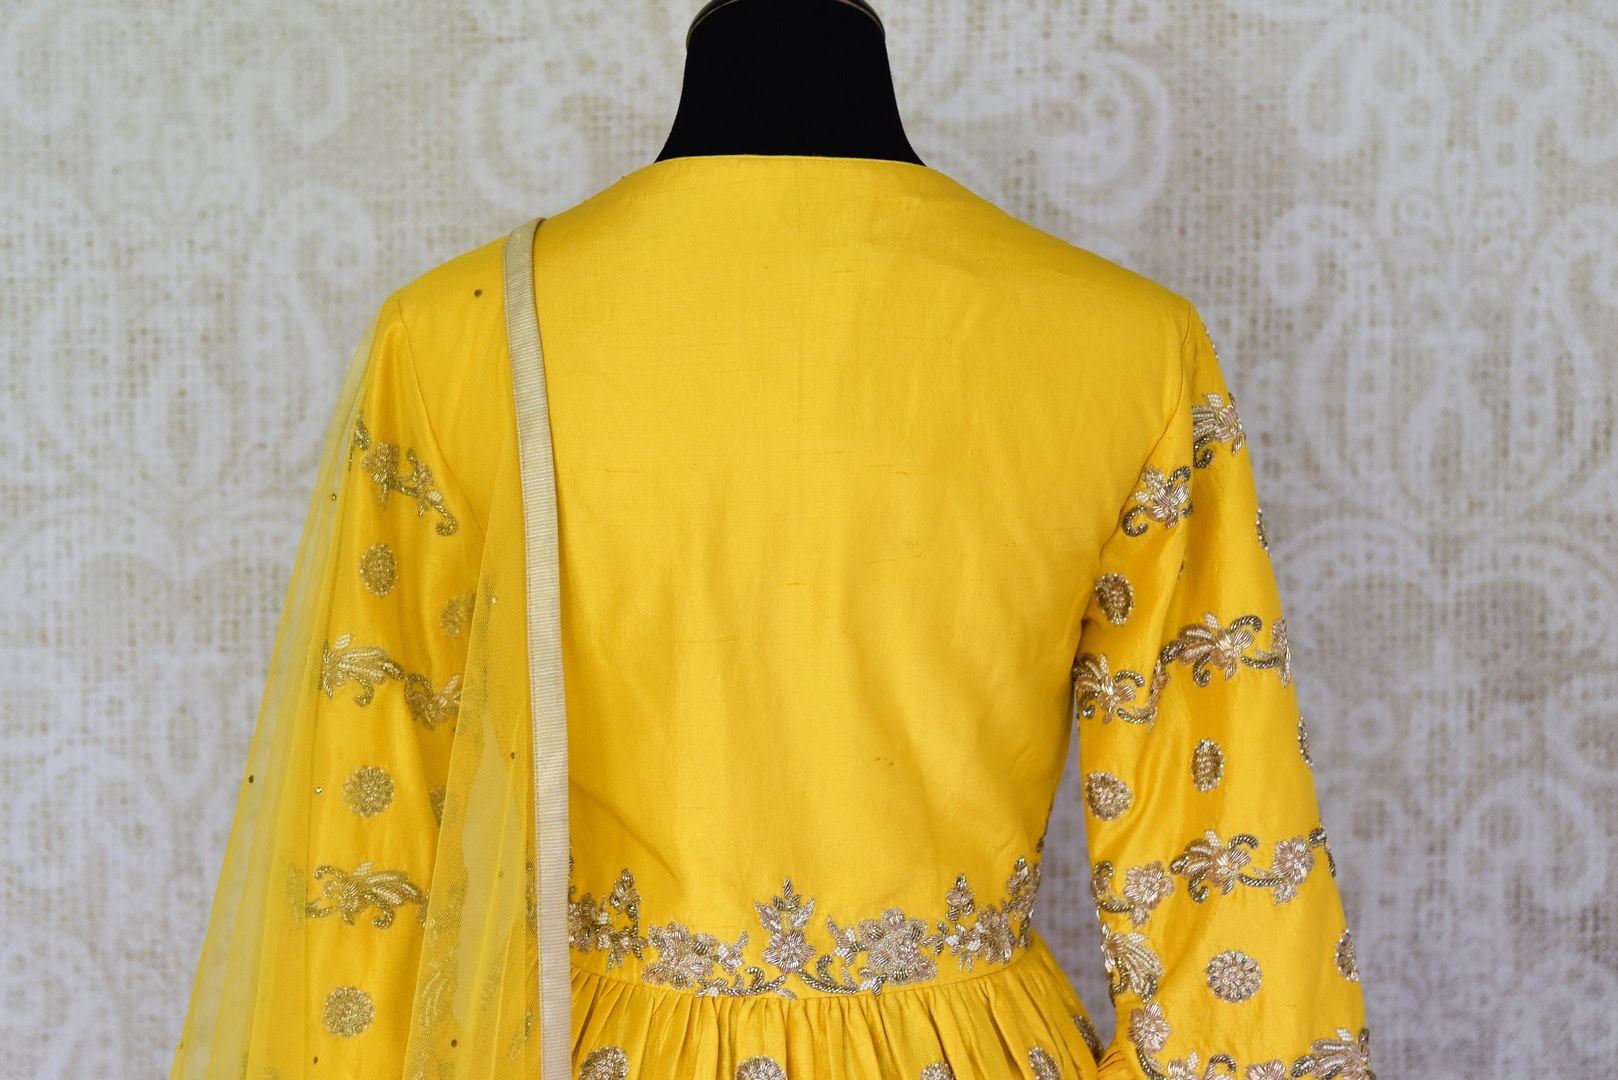 Buy yellow embroidered peplum kurti with skirt online in USA and dupatta. Make every occasion special by choosing the best of designer dresses from Pure Elegance Indian clothing store in USA, Shop from a range of stunning designer lehengas, wedding dresses, Indian clothing from our online store.-kurti back